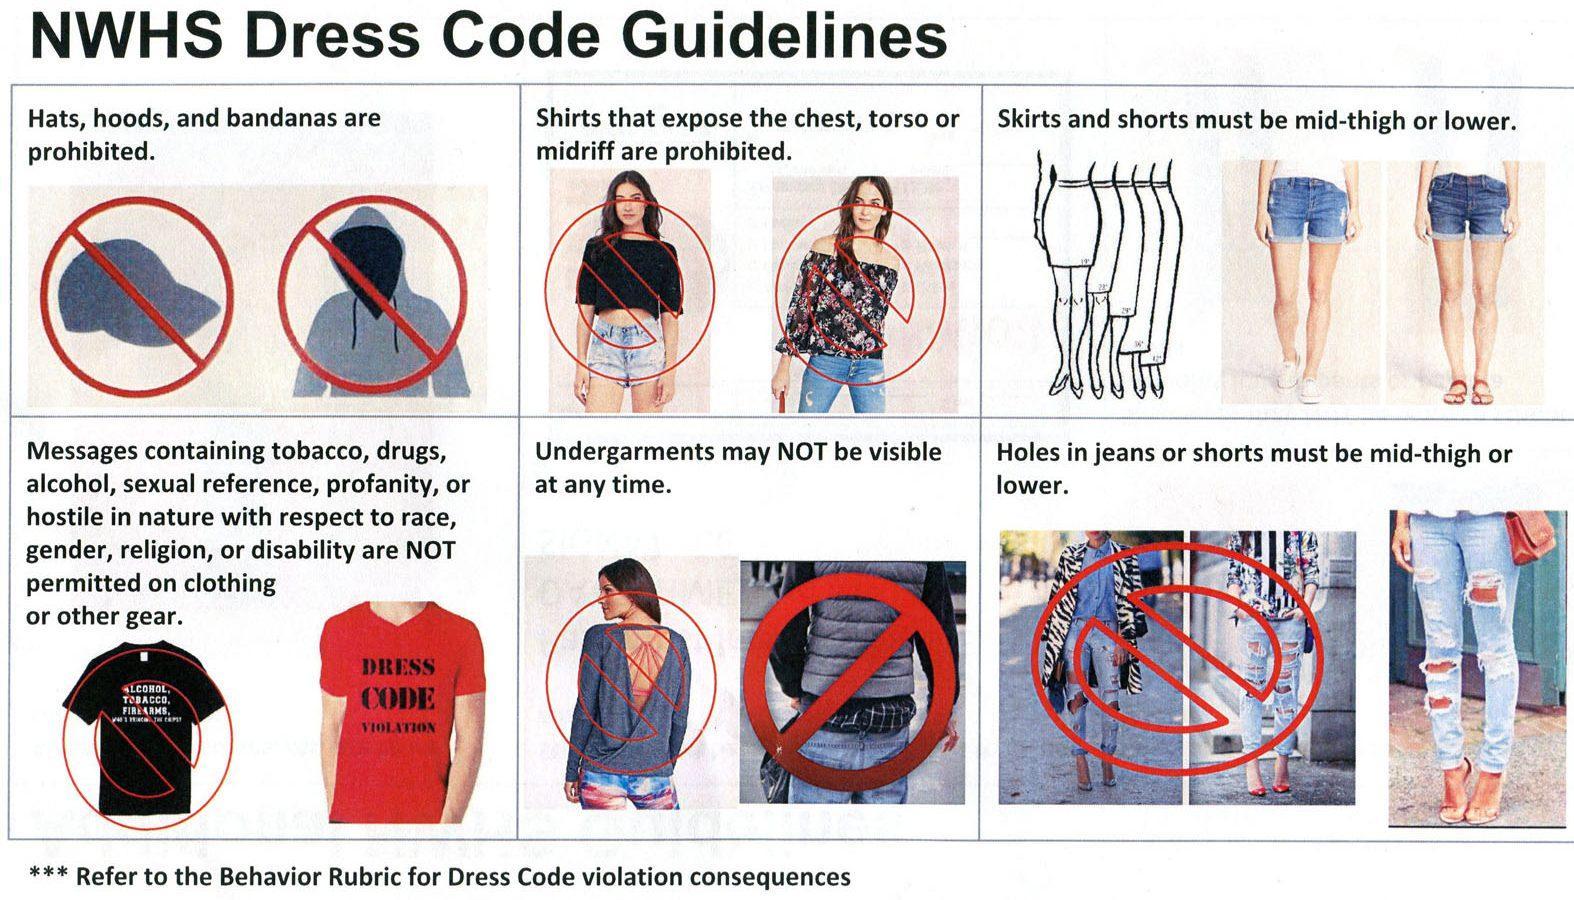 School bans leggings after 'dress code violation' and now the